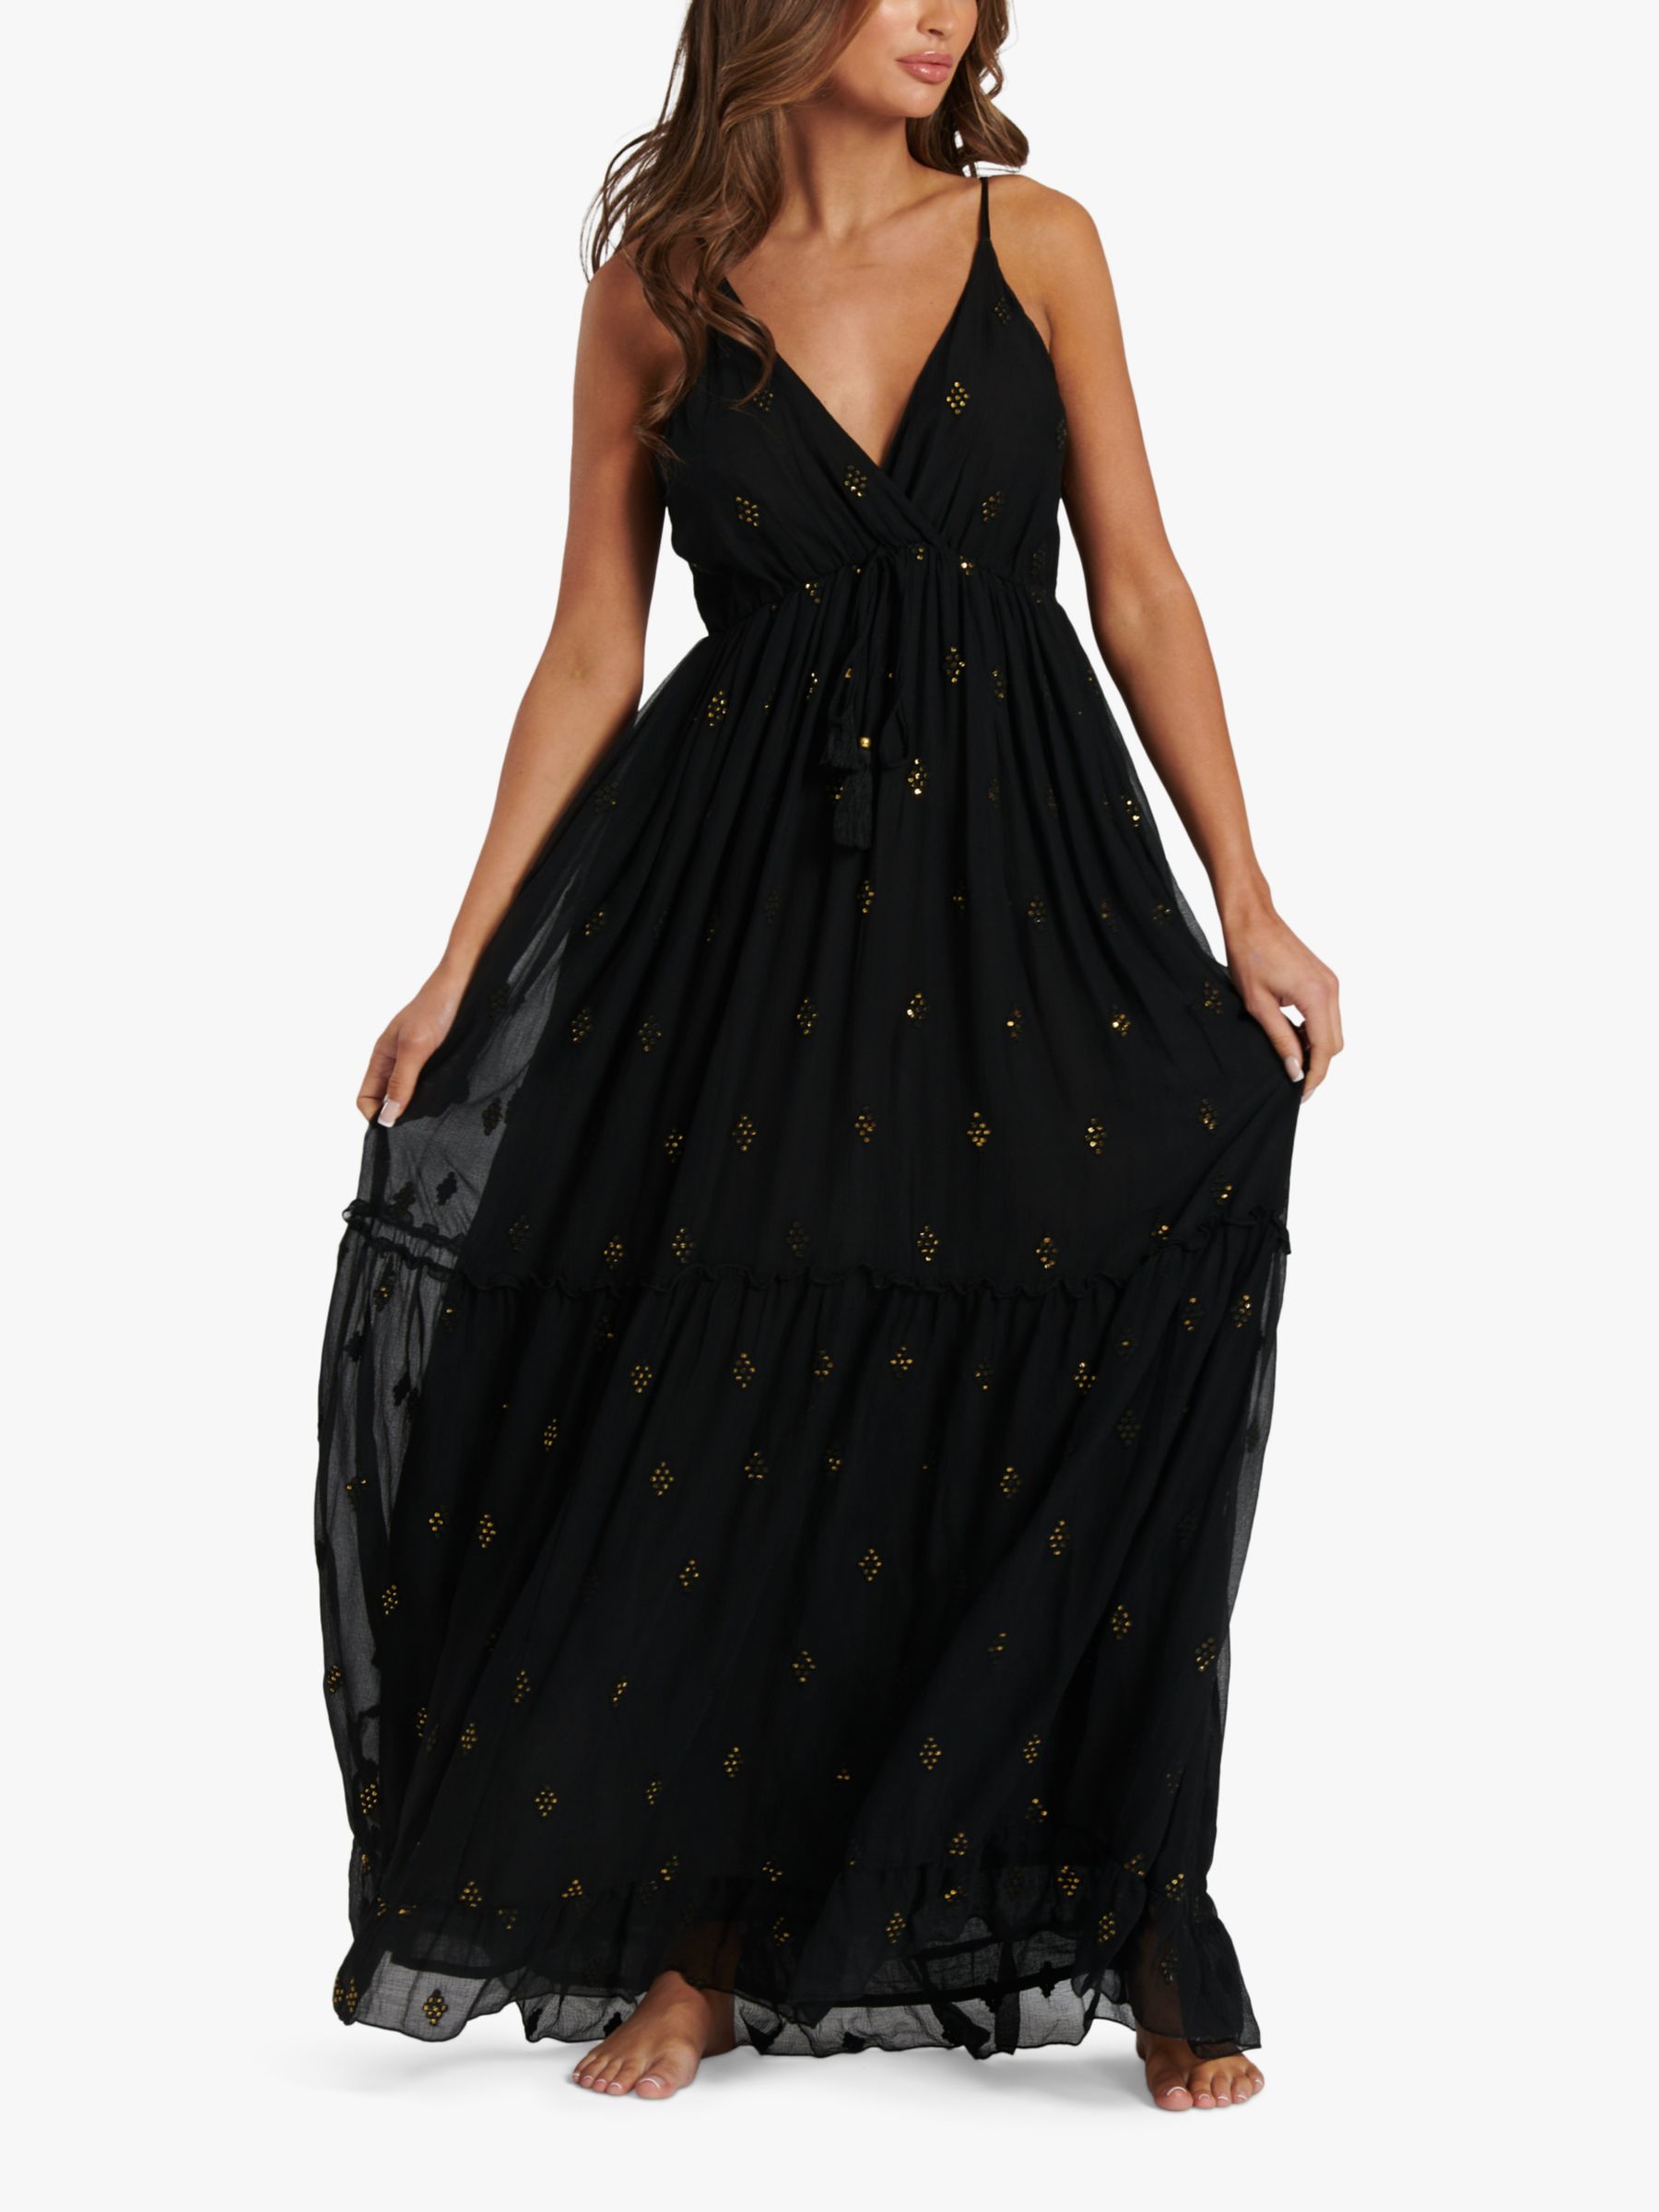 South Beach Sequin Detail Tiered Maxi Dress, Black/Gold, 8